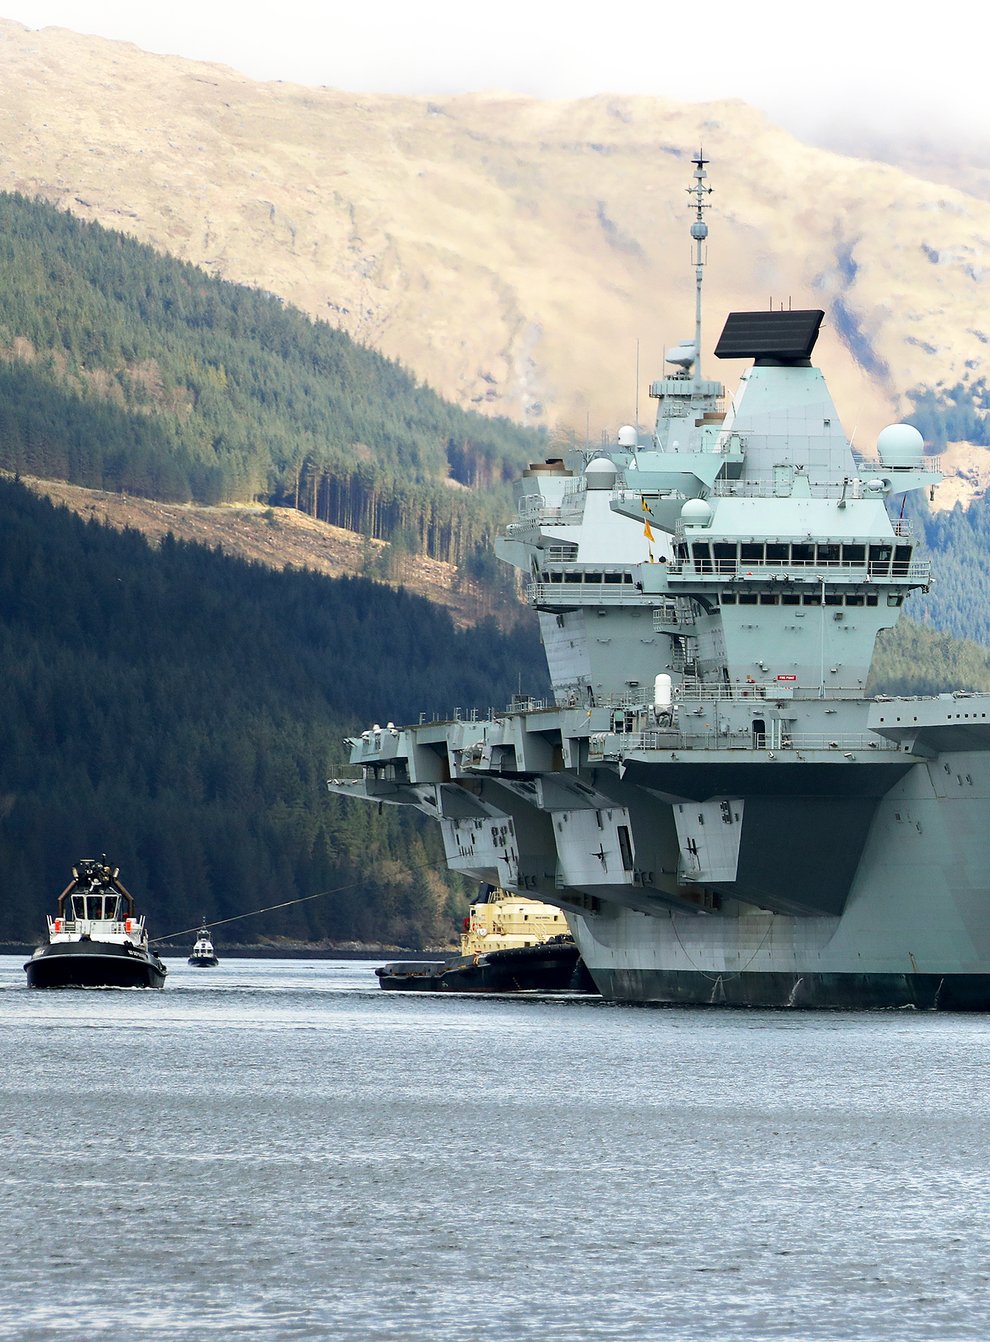 HMS Queen Elizabeth will head to the Indian Ocean and East Asia later this year